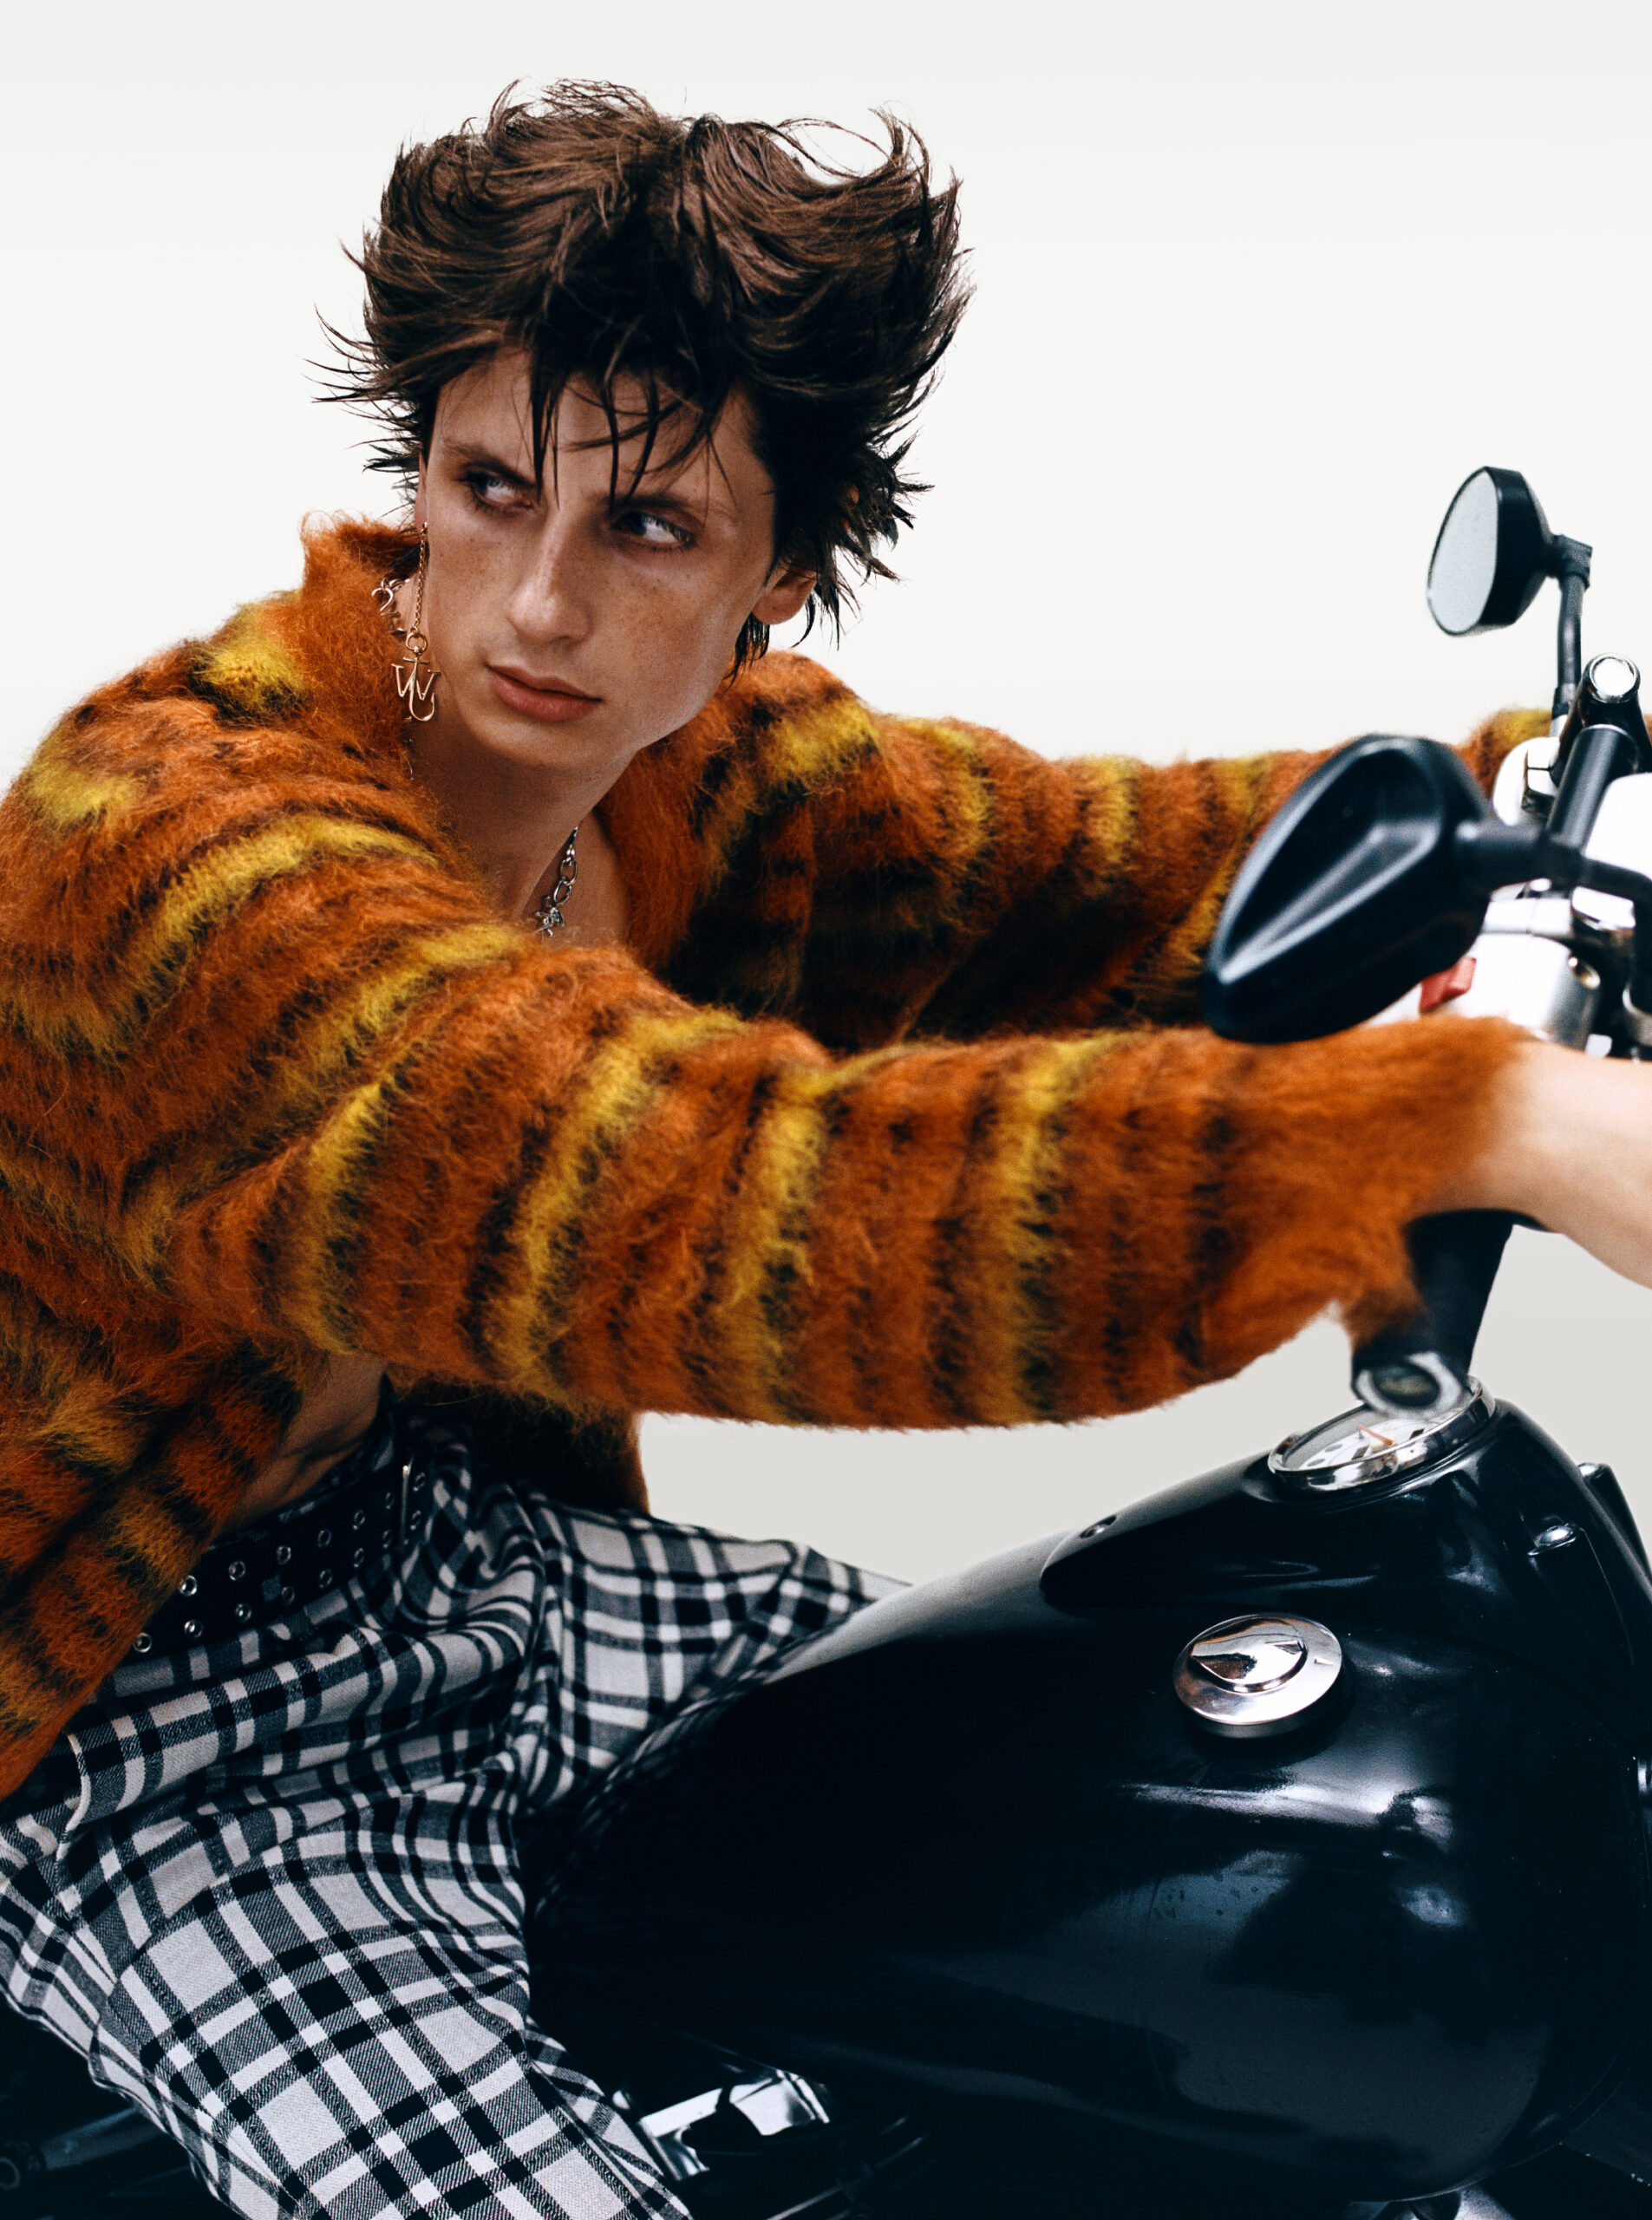 Model riding a motorbike in a fuzzy orange sweater. SWEATER ($1,700) BY MARNI, AND EARRINGS ($375) BY JW ANDERSON, AT SIMONS; PANTS ($495) BY HAROLD, AT HARRY ROSEN.